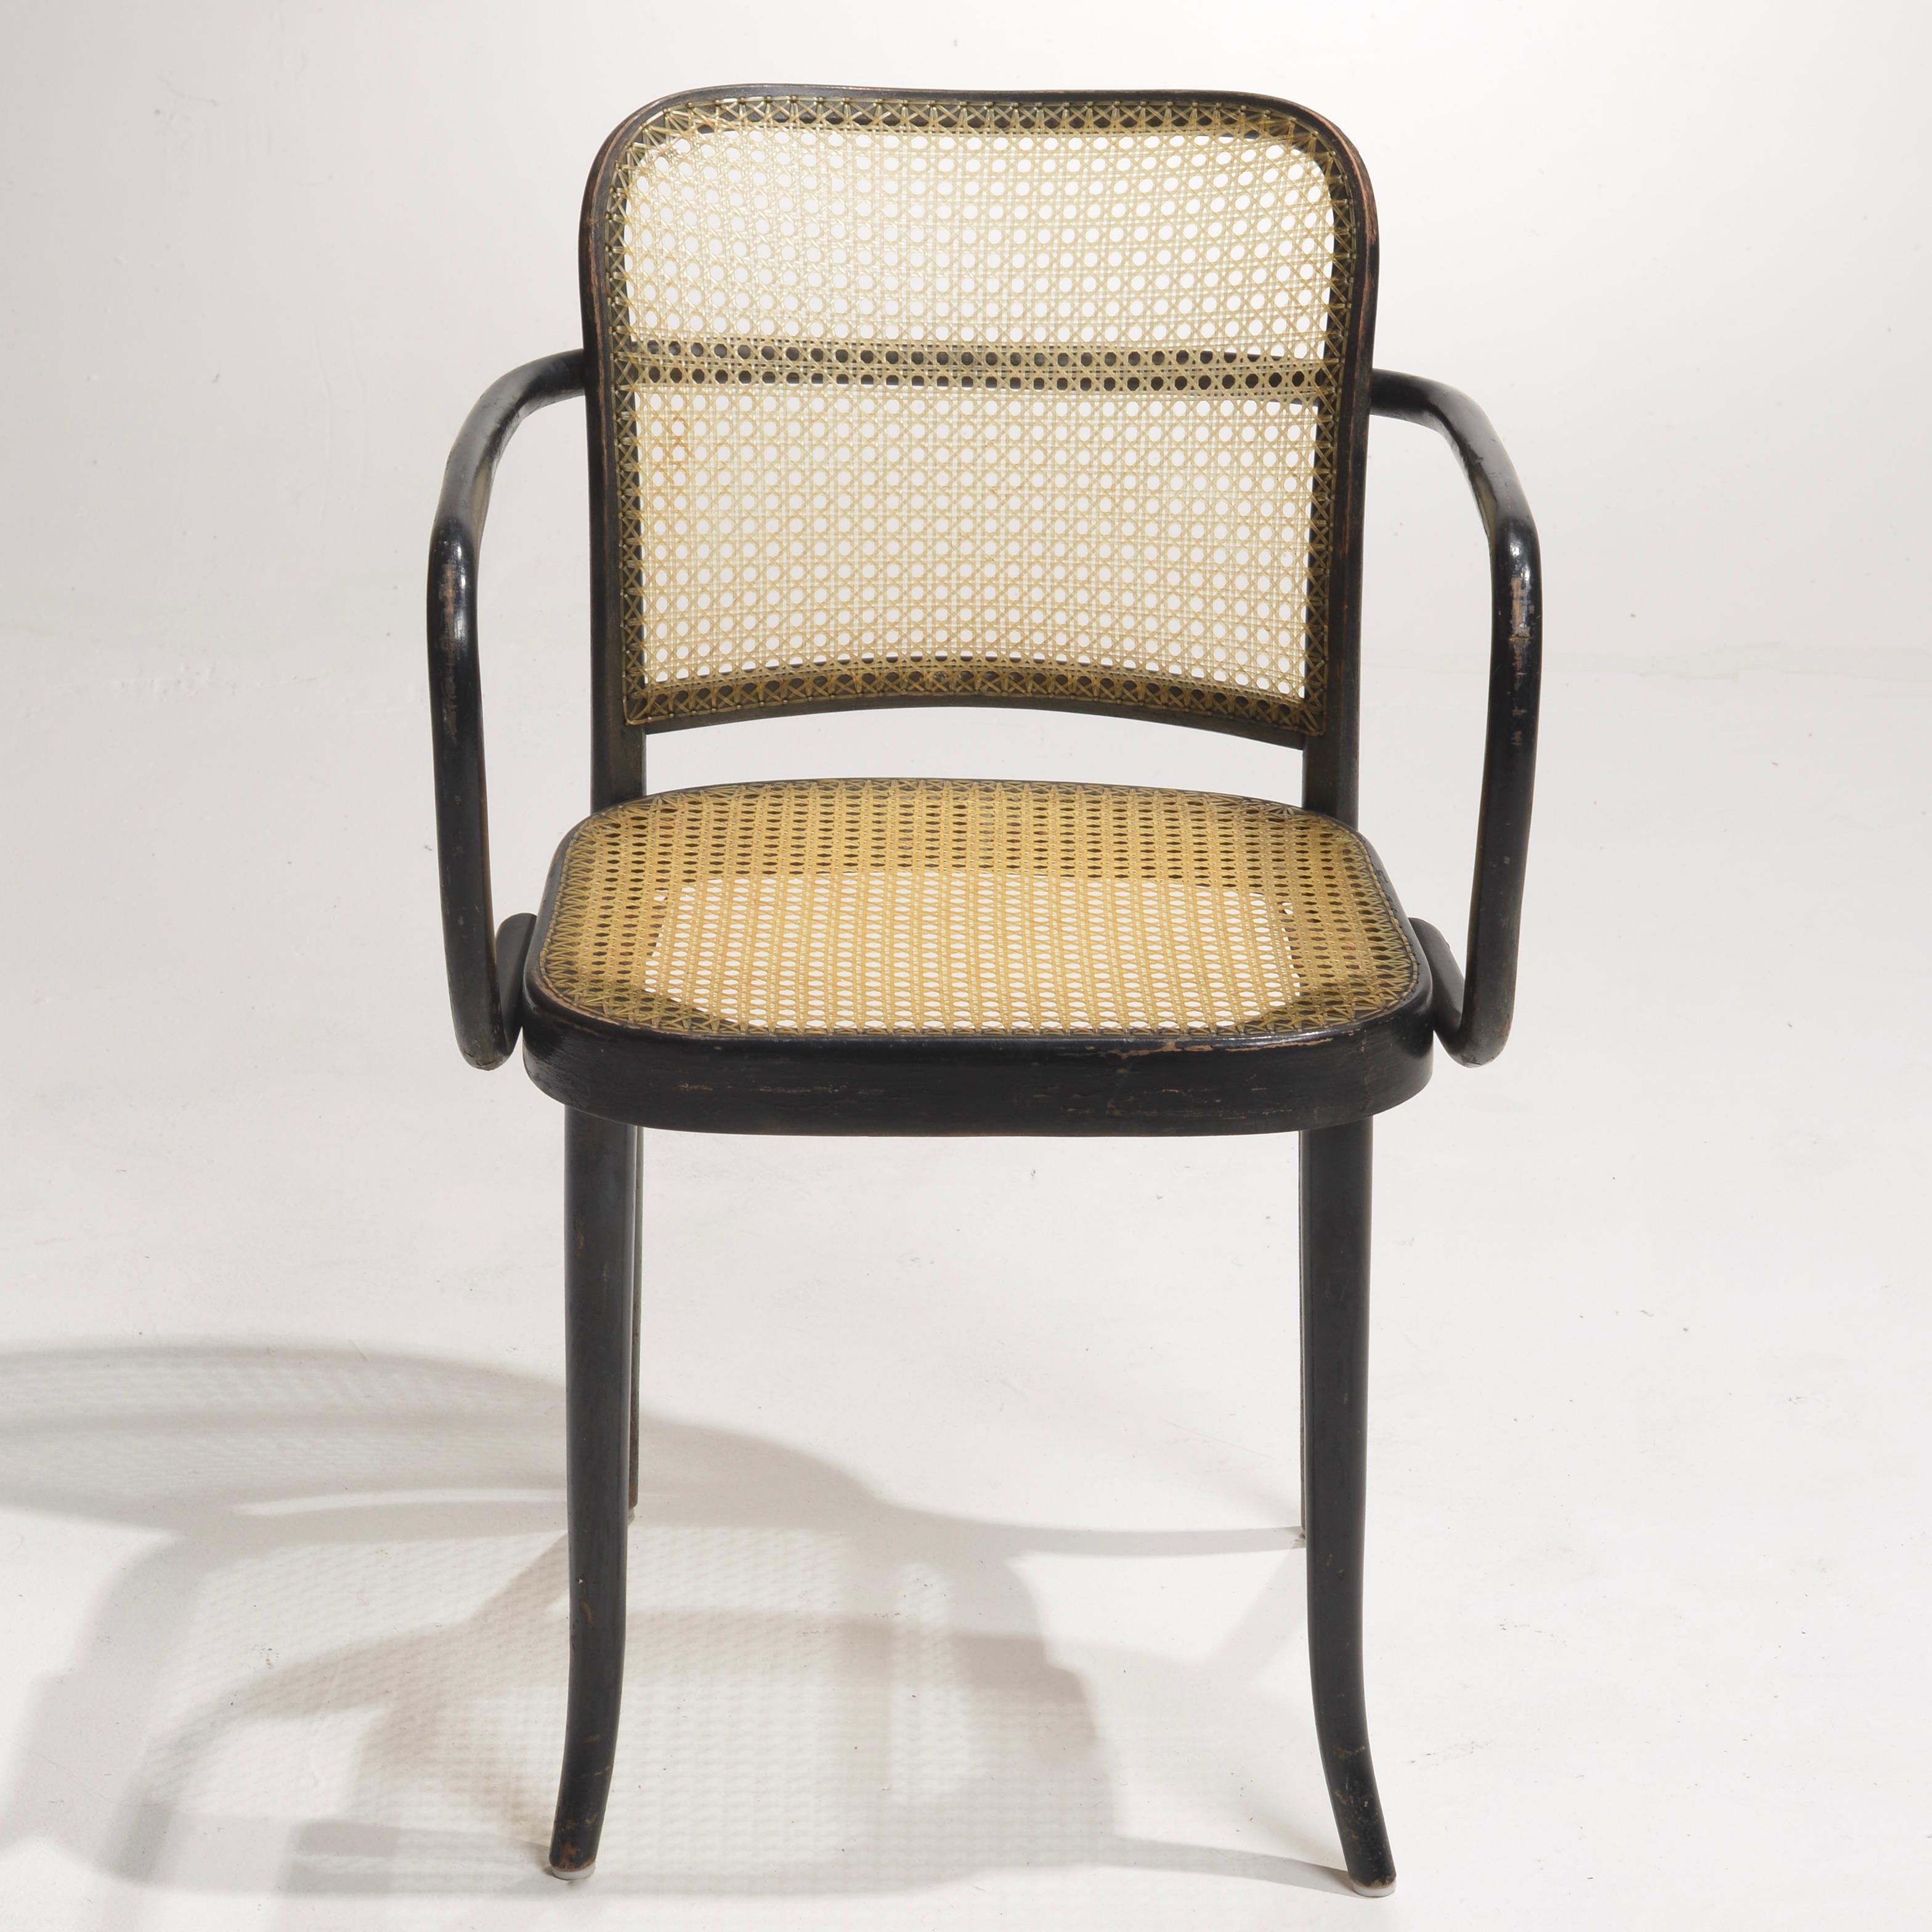 Modern Josef Hoffmann Bentwood Beech Prague Model 811 Chairs in Black and Leather Weave For Sale